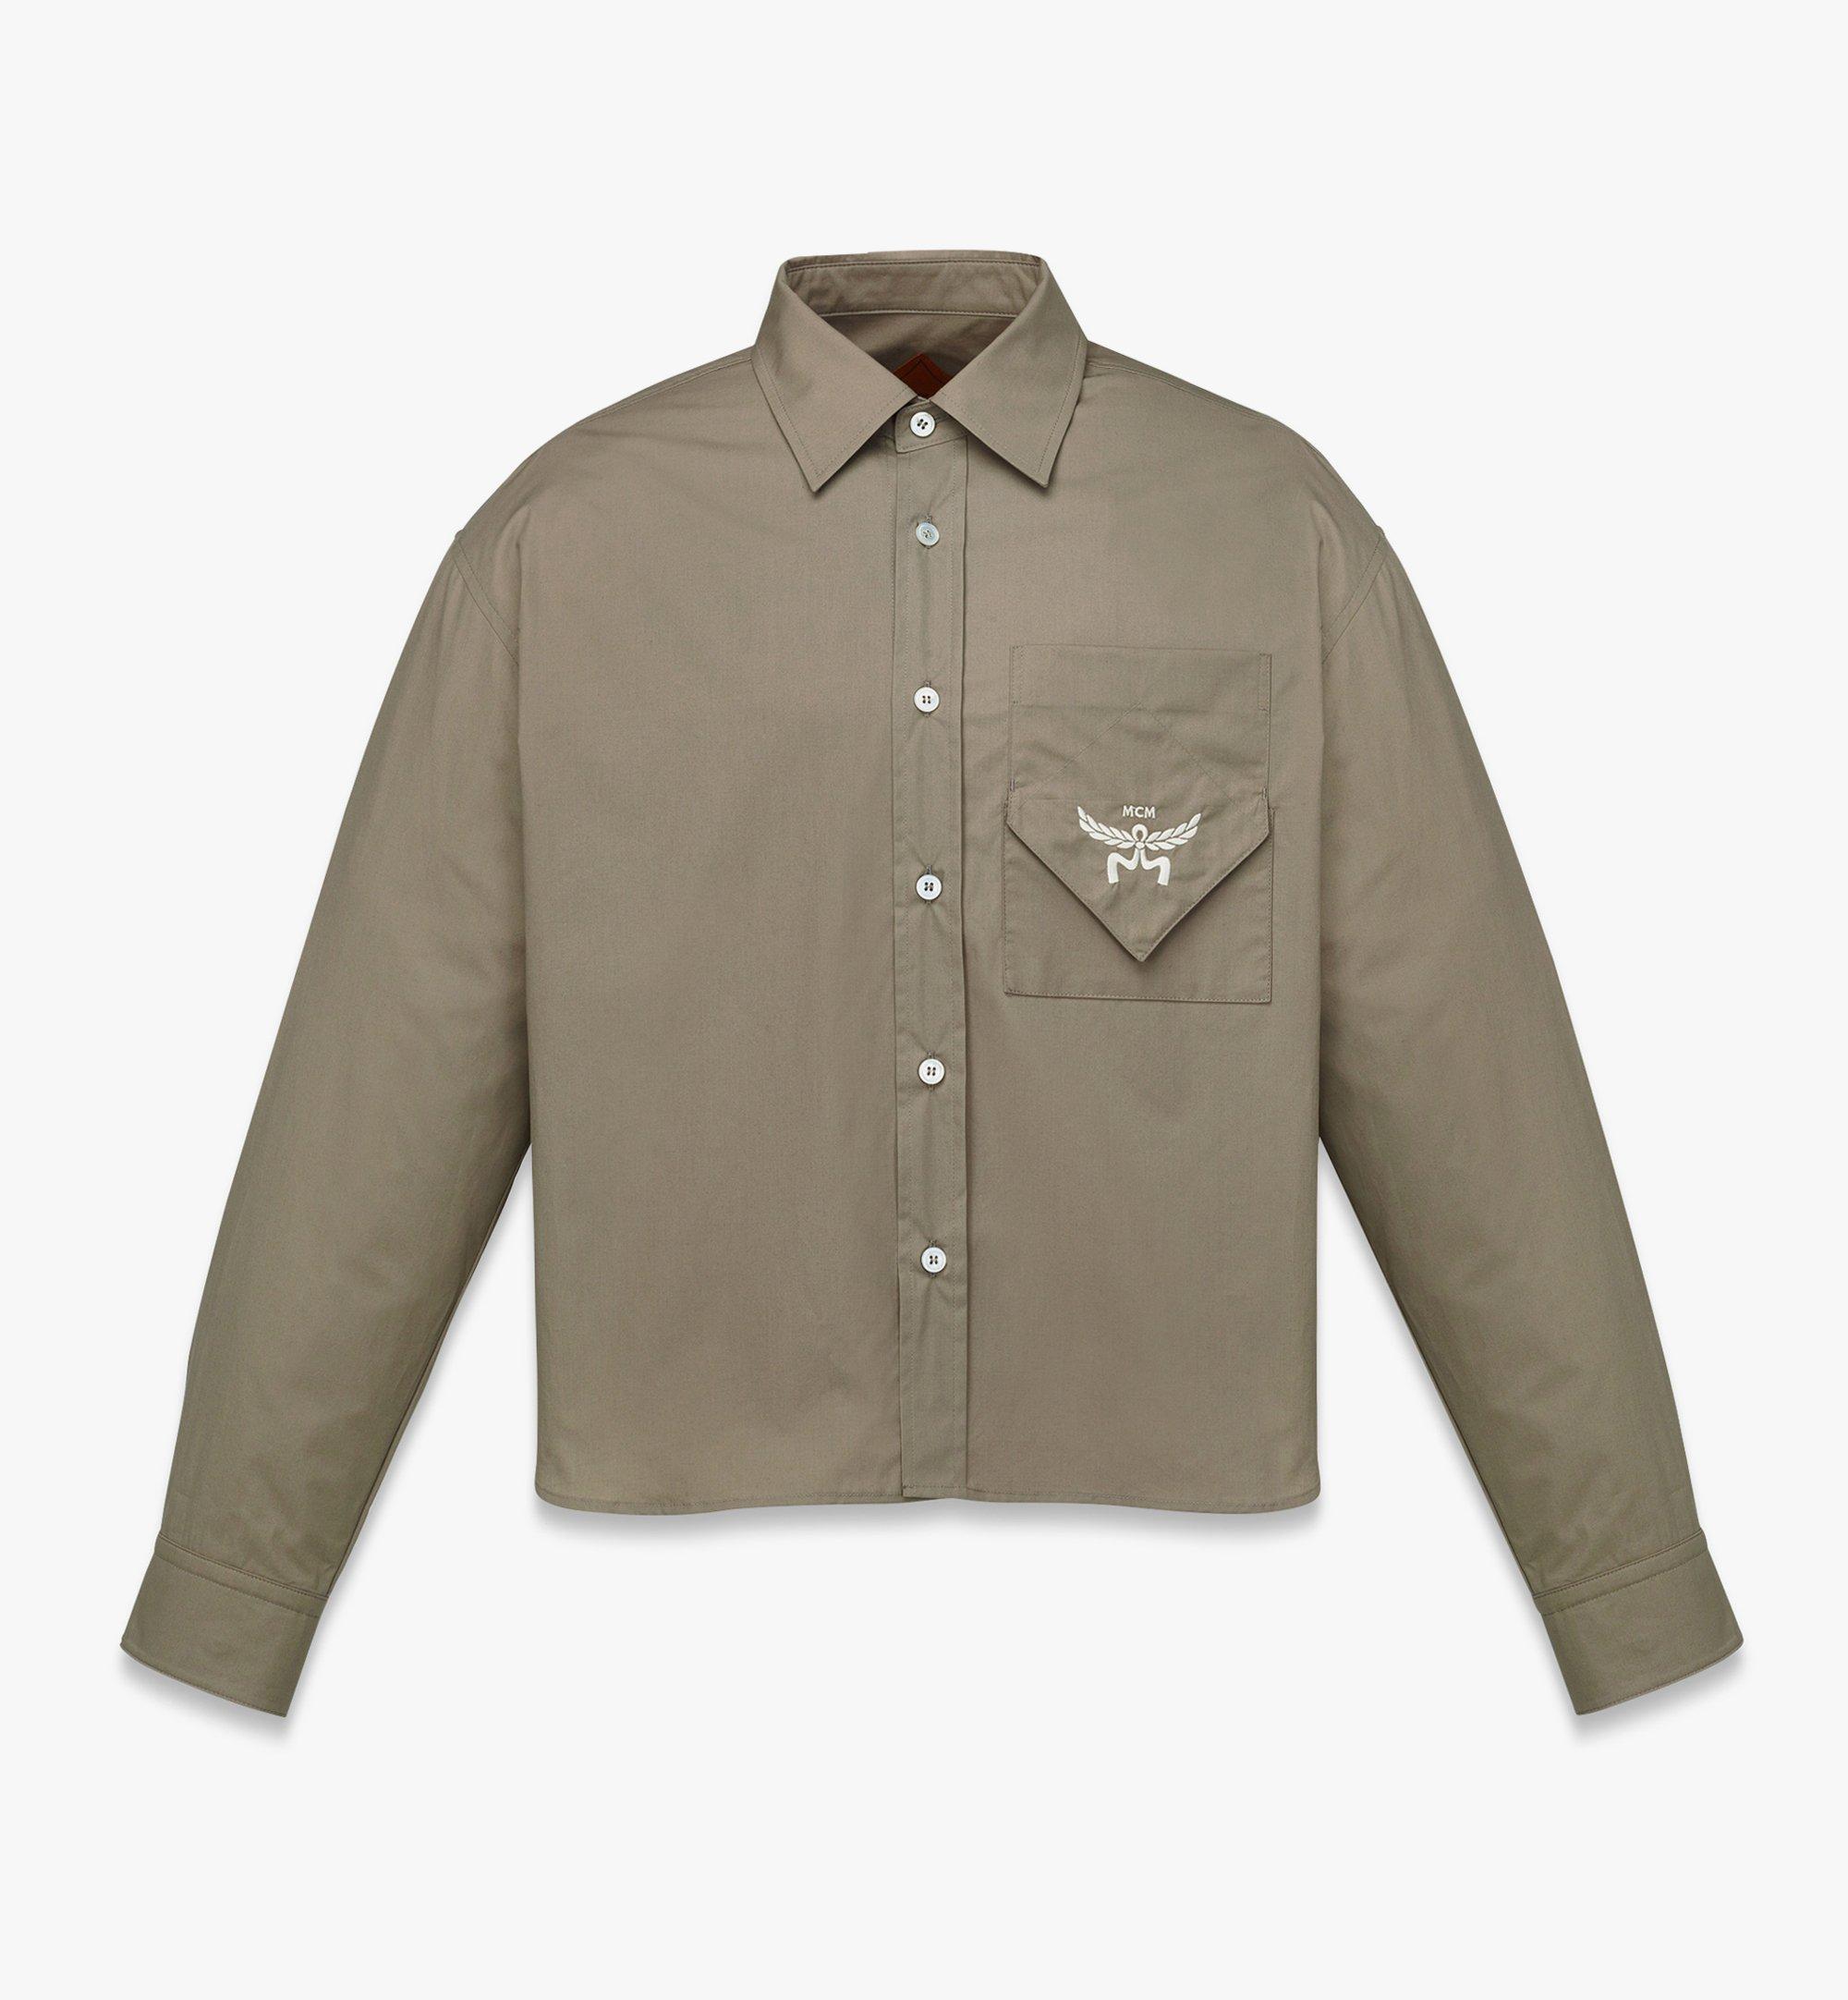 Mcm Logo Embroidery Long Sleeve Shirt In Beige